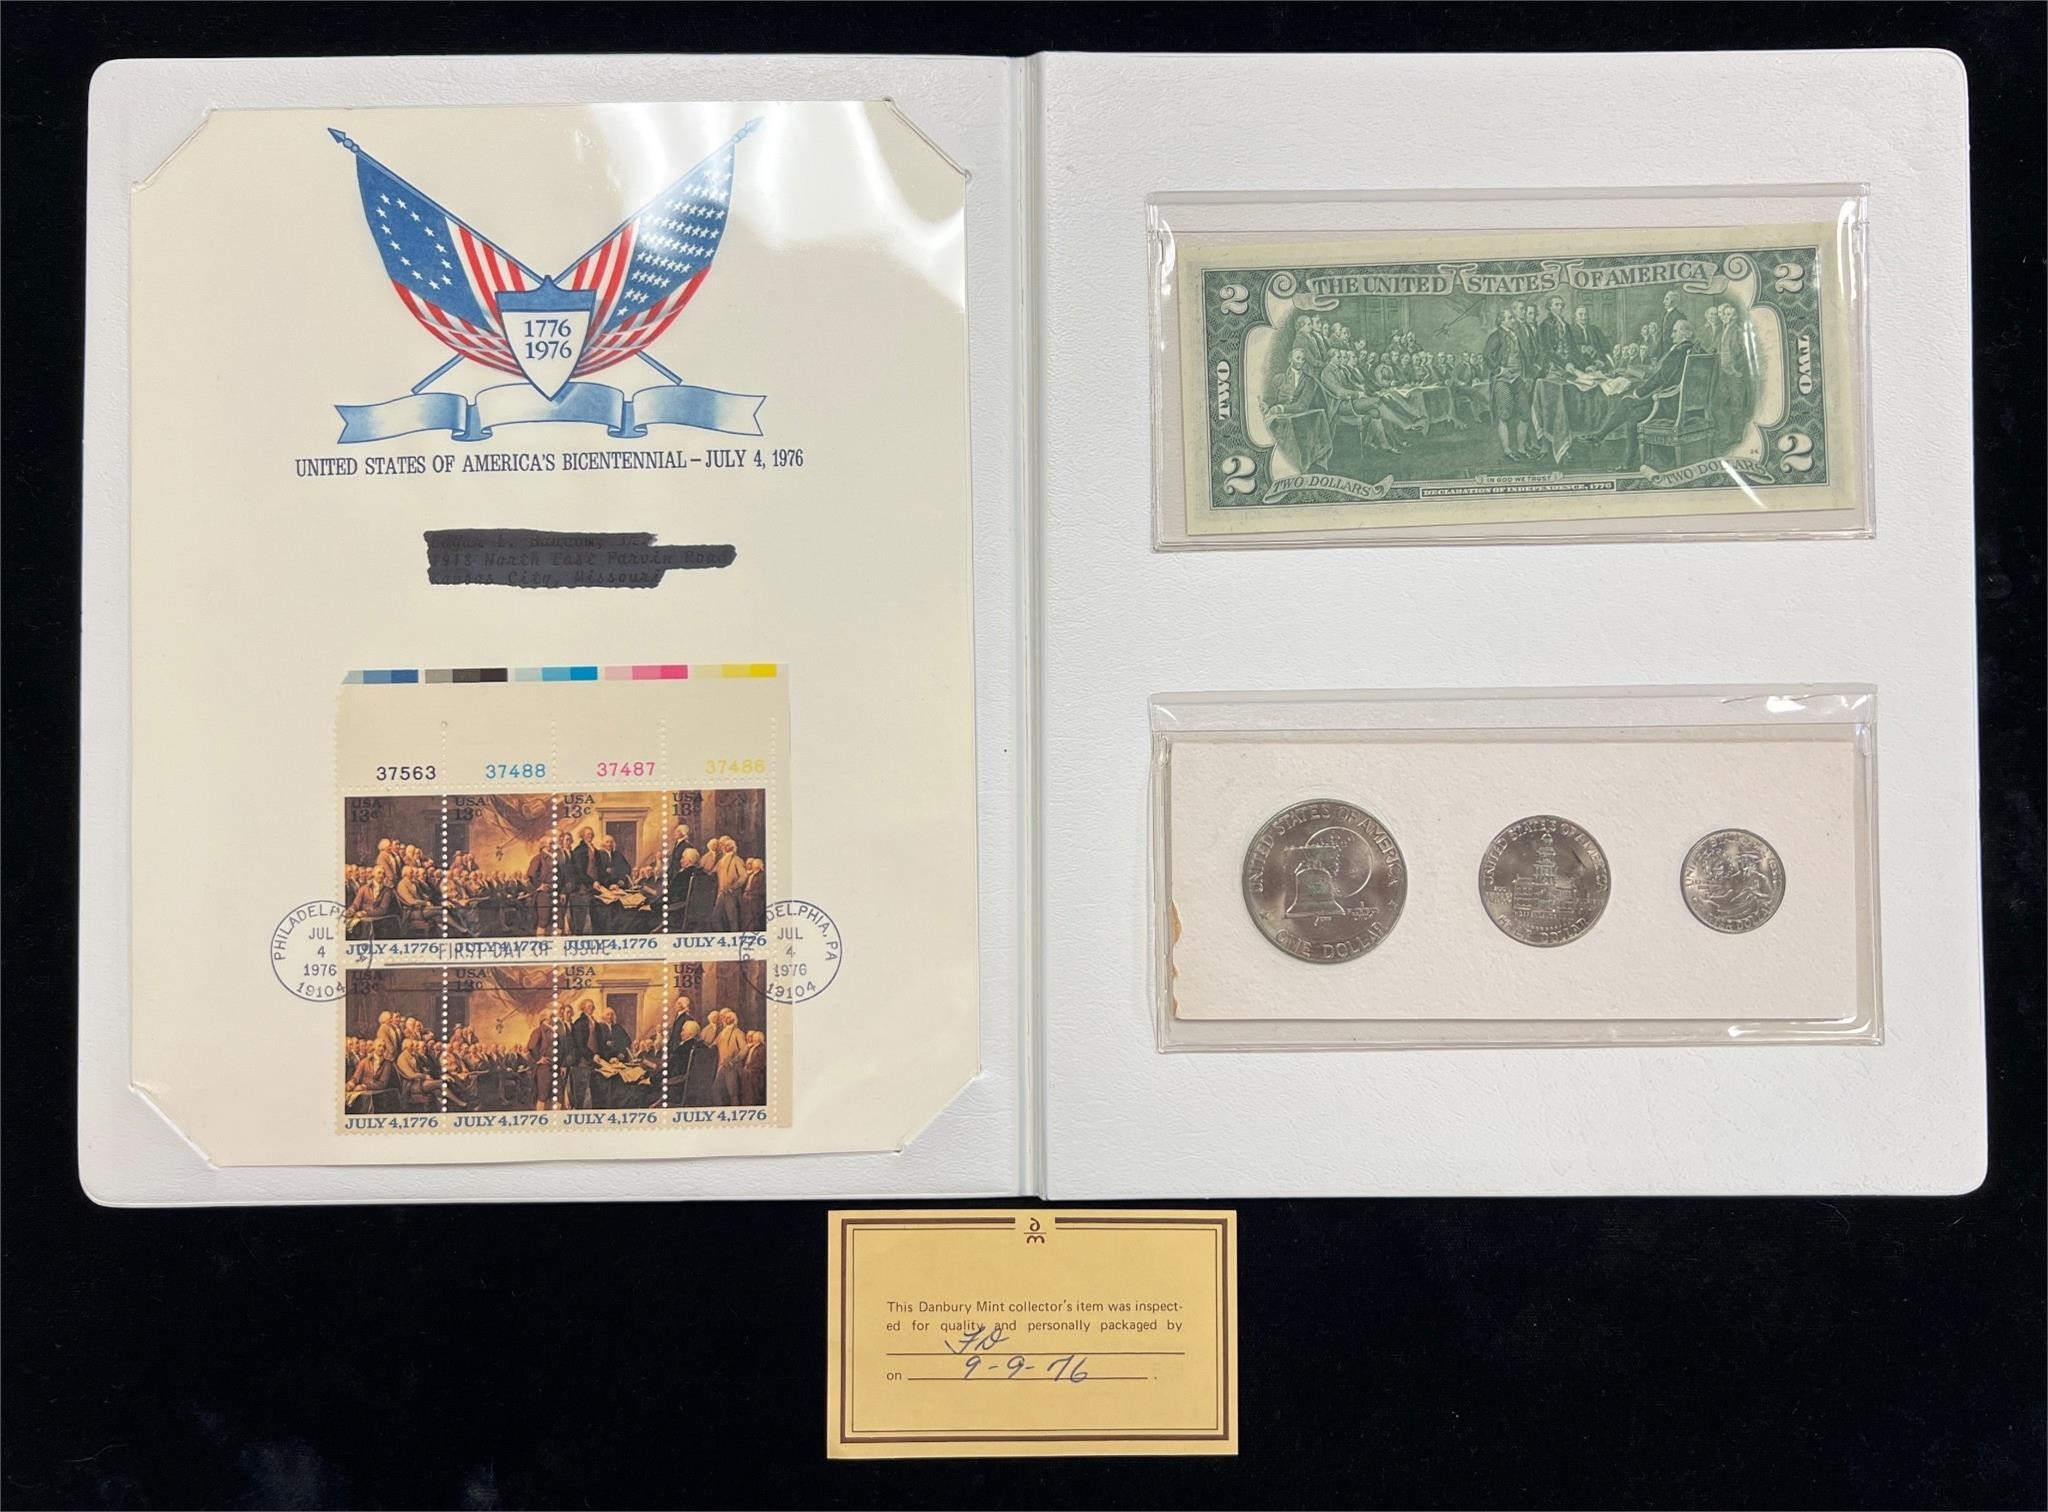 United States Bicentennial Currency & Stamps